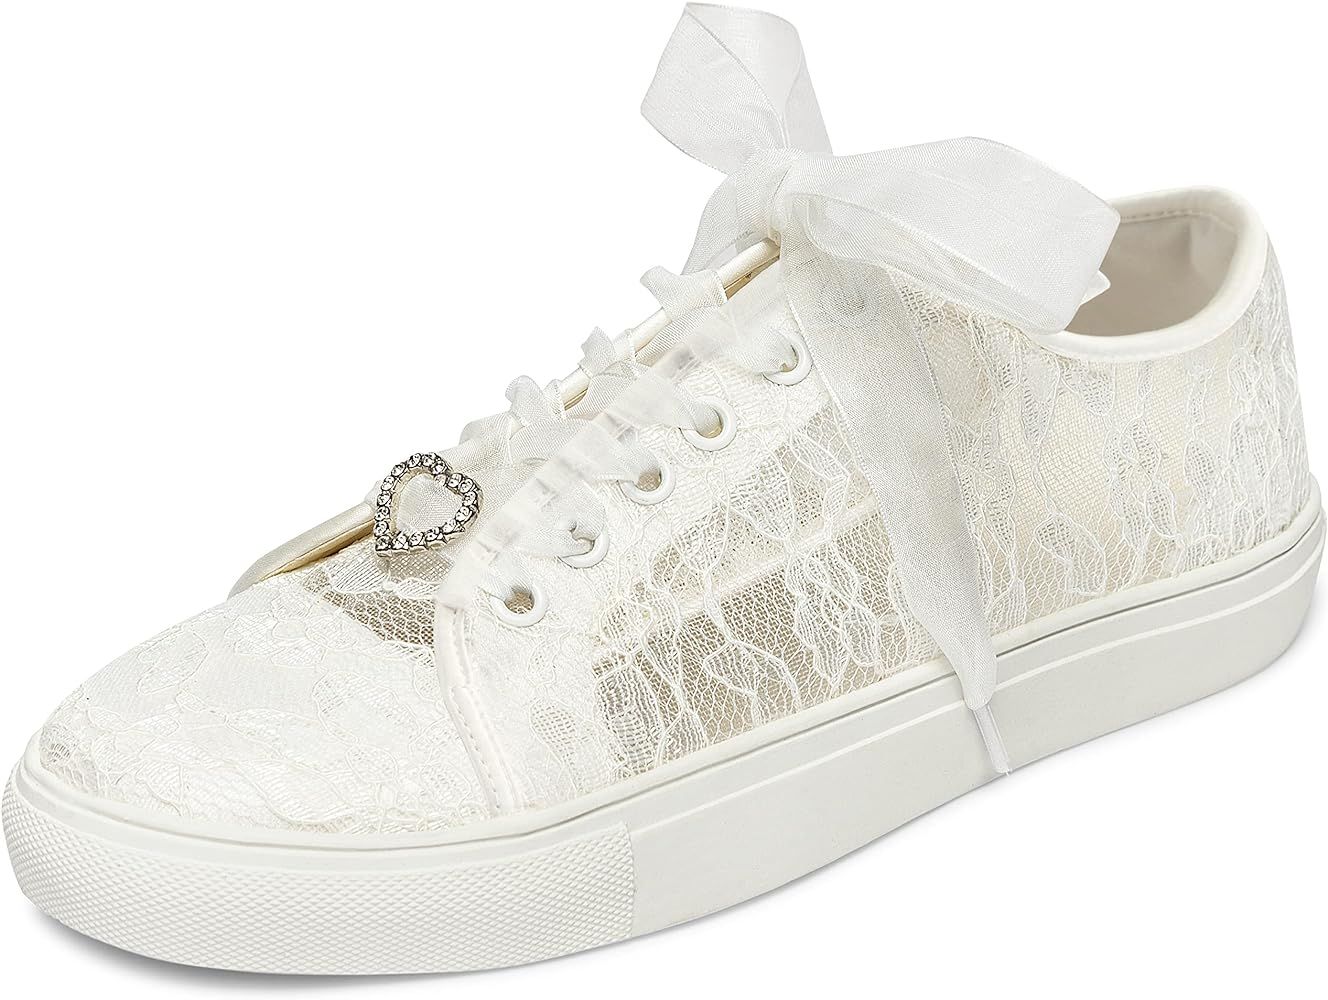 JIAJIA 8832 Wedding Shoes Bridal Sneakers Flats Bride Tennis Shoes Lace Sneakers | Amazon (US)